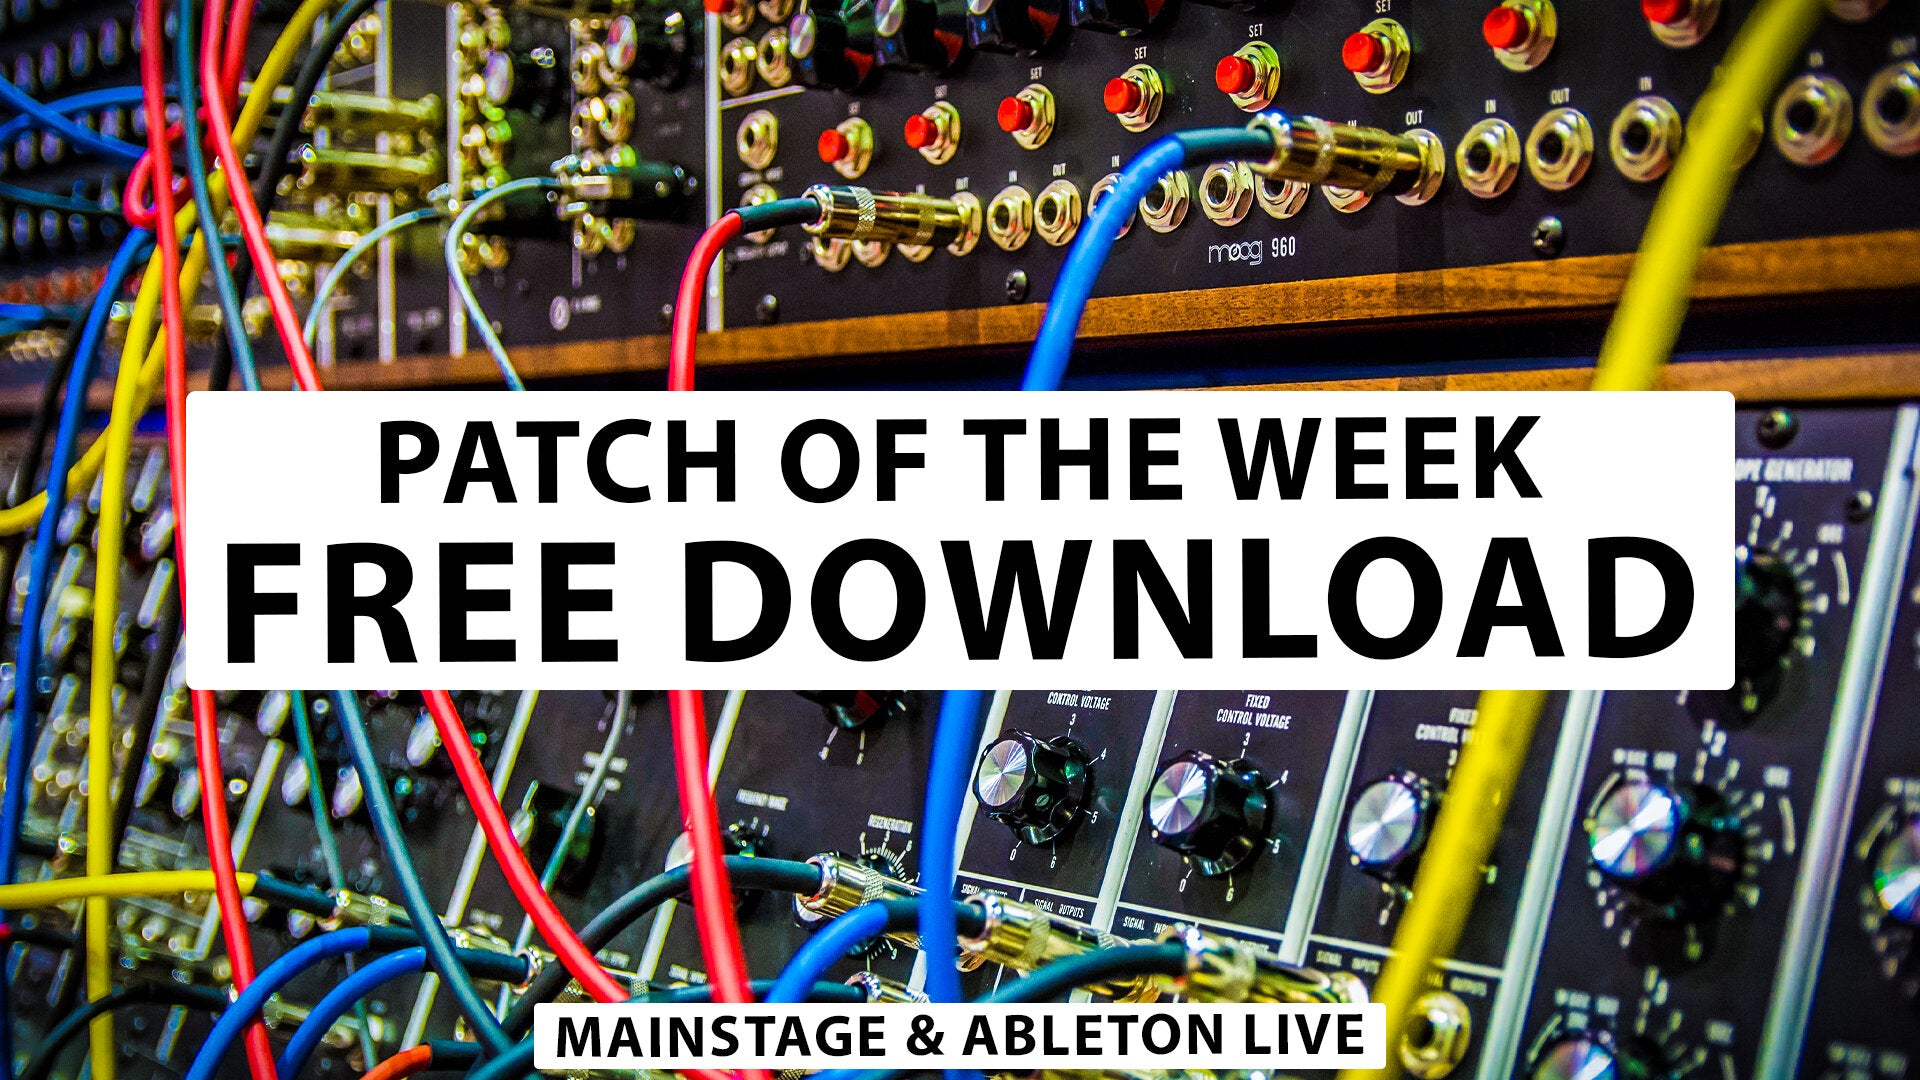 Endless Pad - Free MainStage & Ableton Worship Patch!